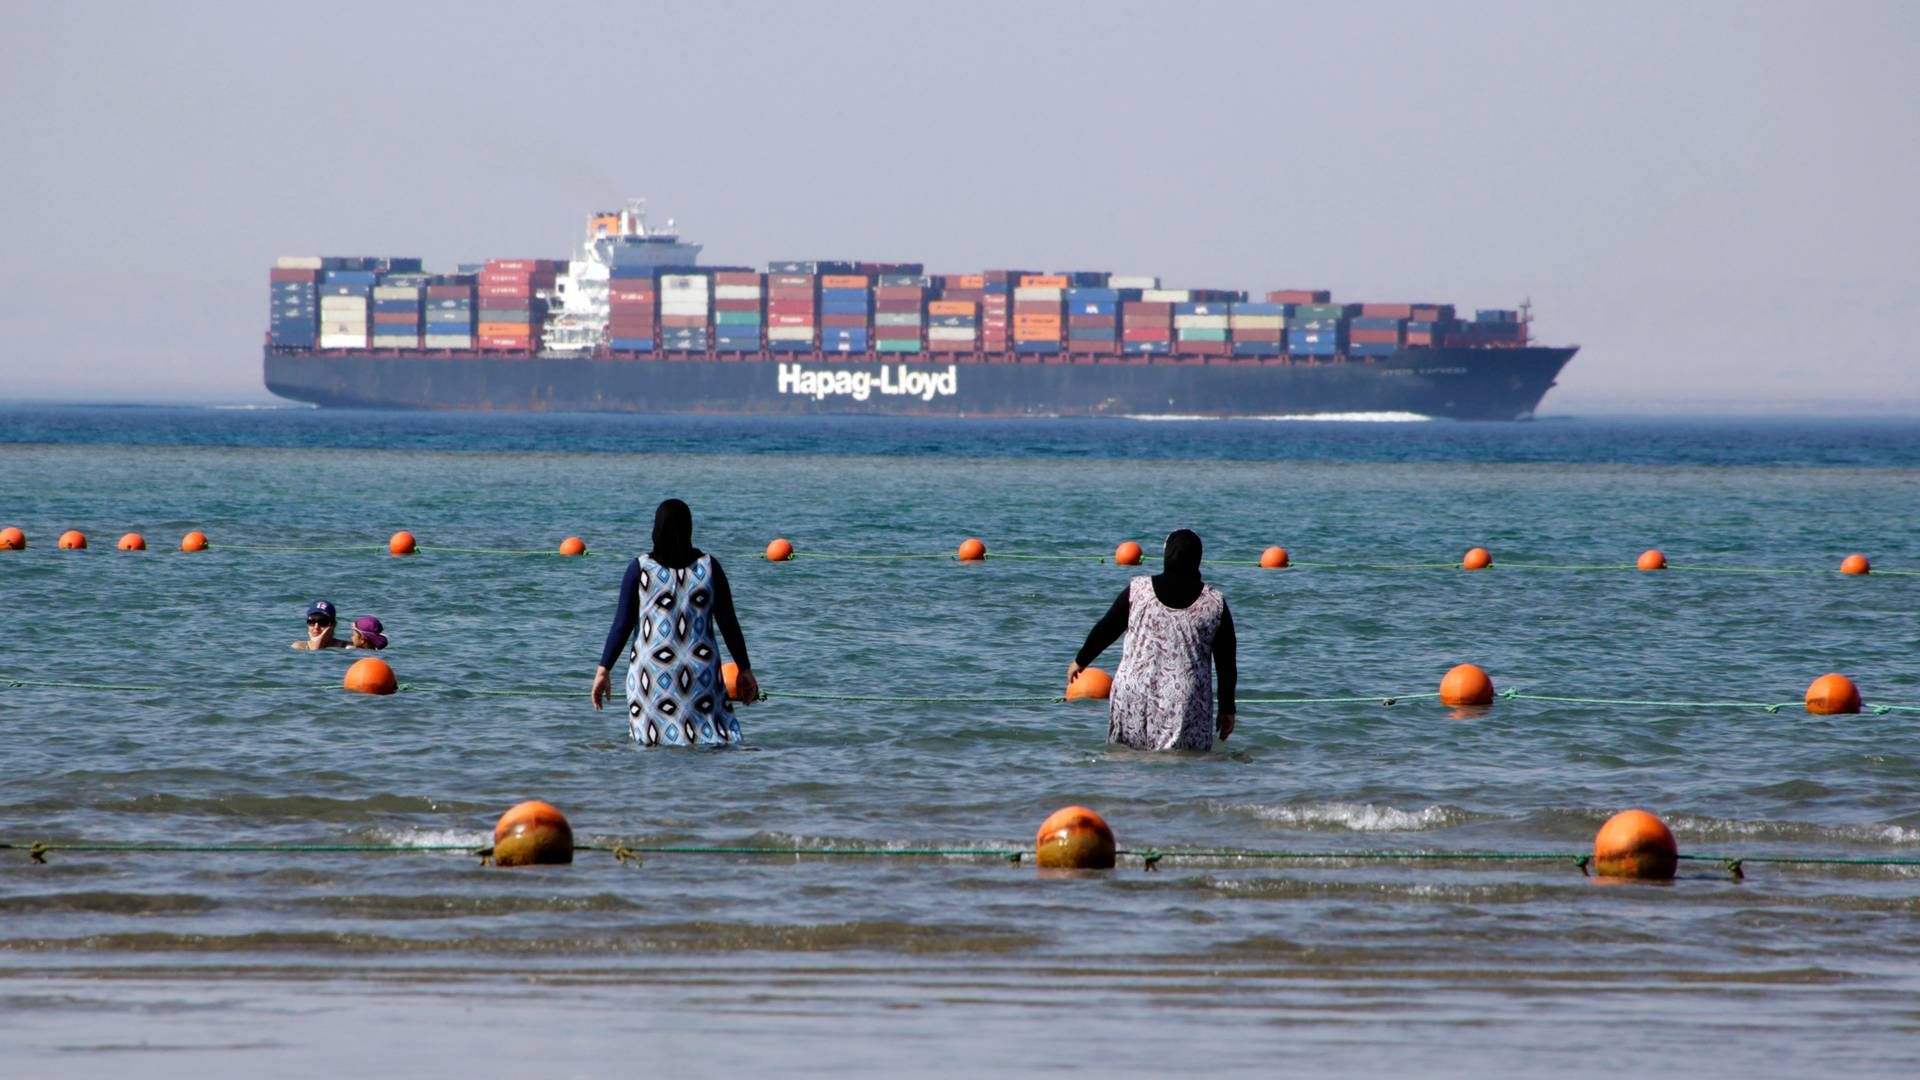 Container ship from Hapag-Lloyd heading for the Red Sea. | Photo: Amr Nabil/AP/Ritzau Scanpix